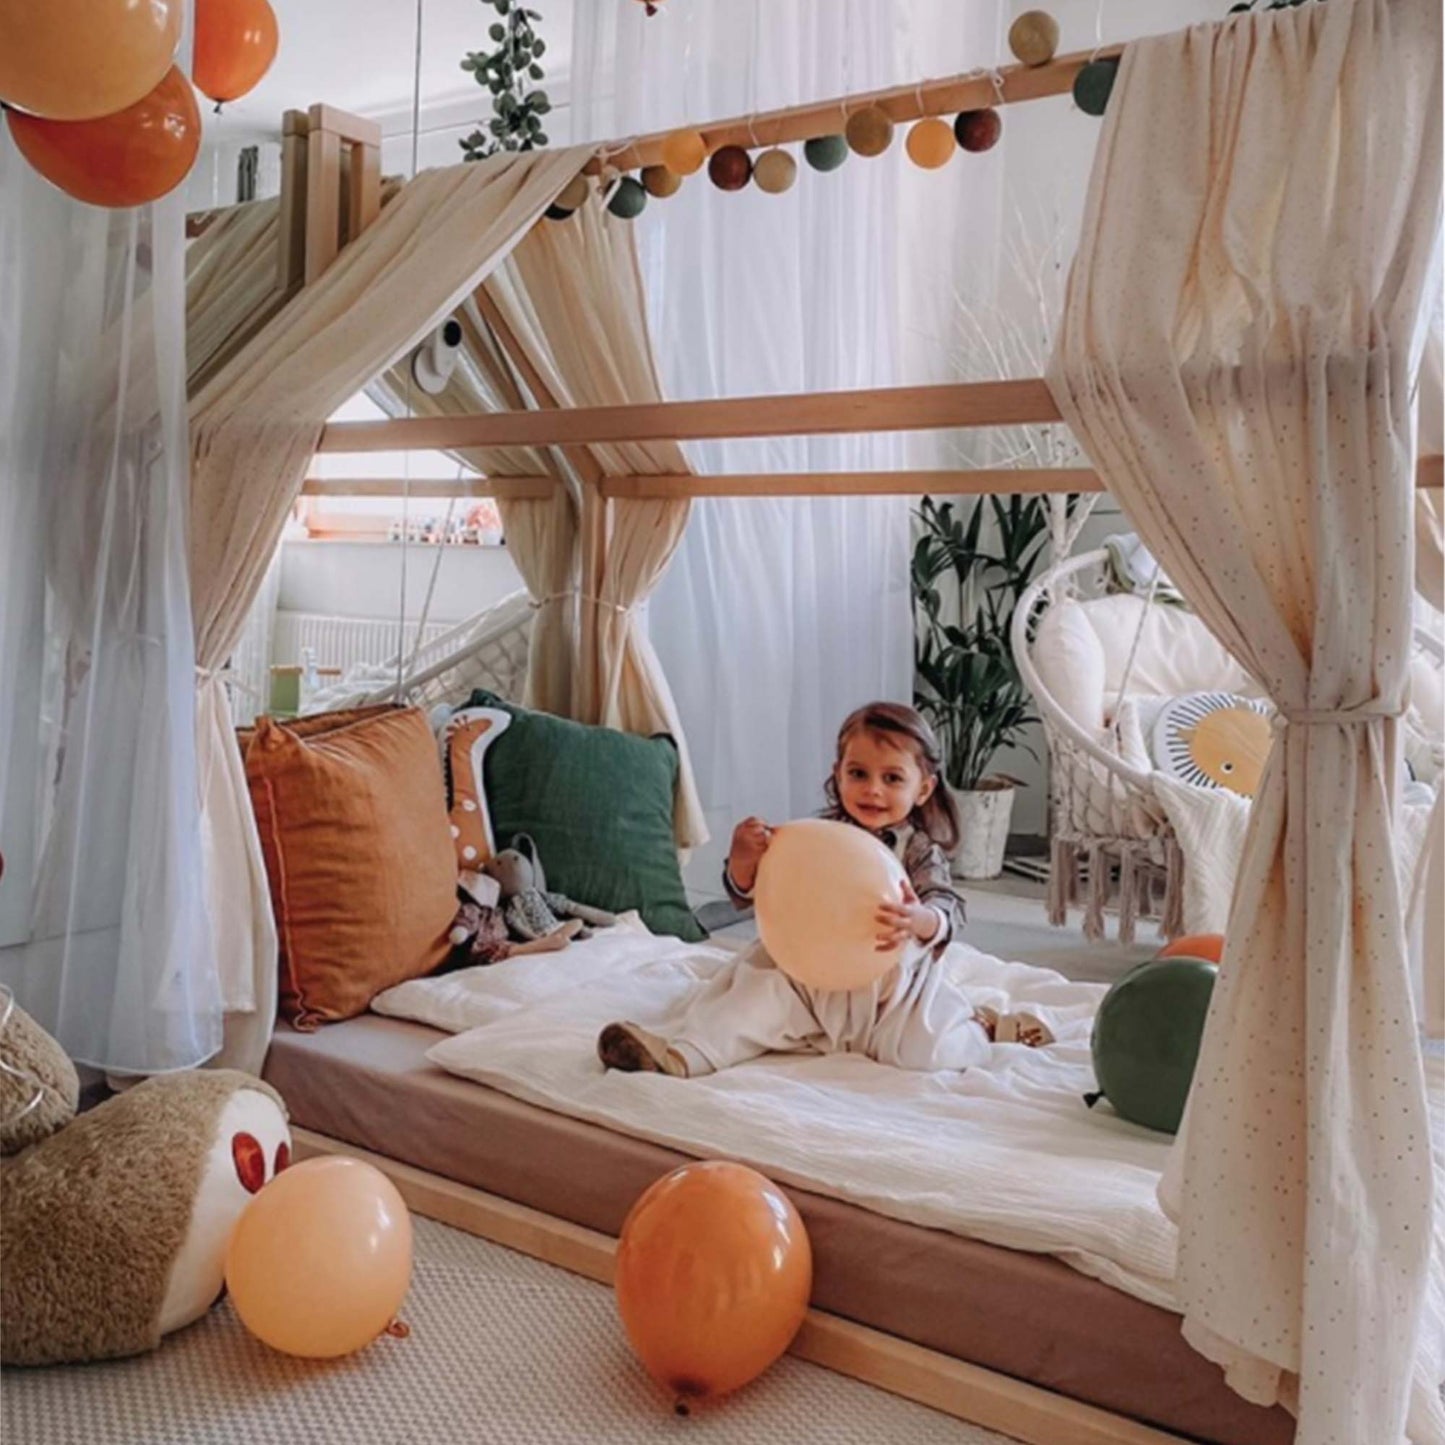 A little girl sitting on a cozy Sweet Home From Wood Wooden zero-clearance house bed with balloons and a house-shaped canopy.